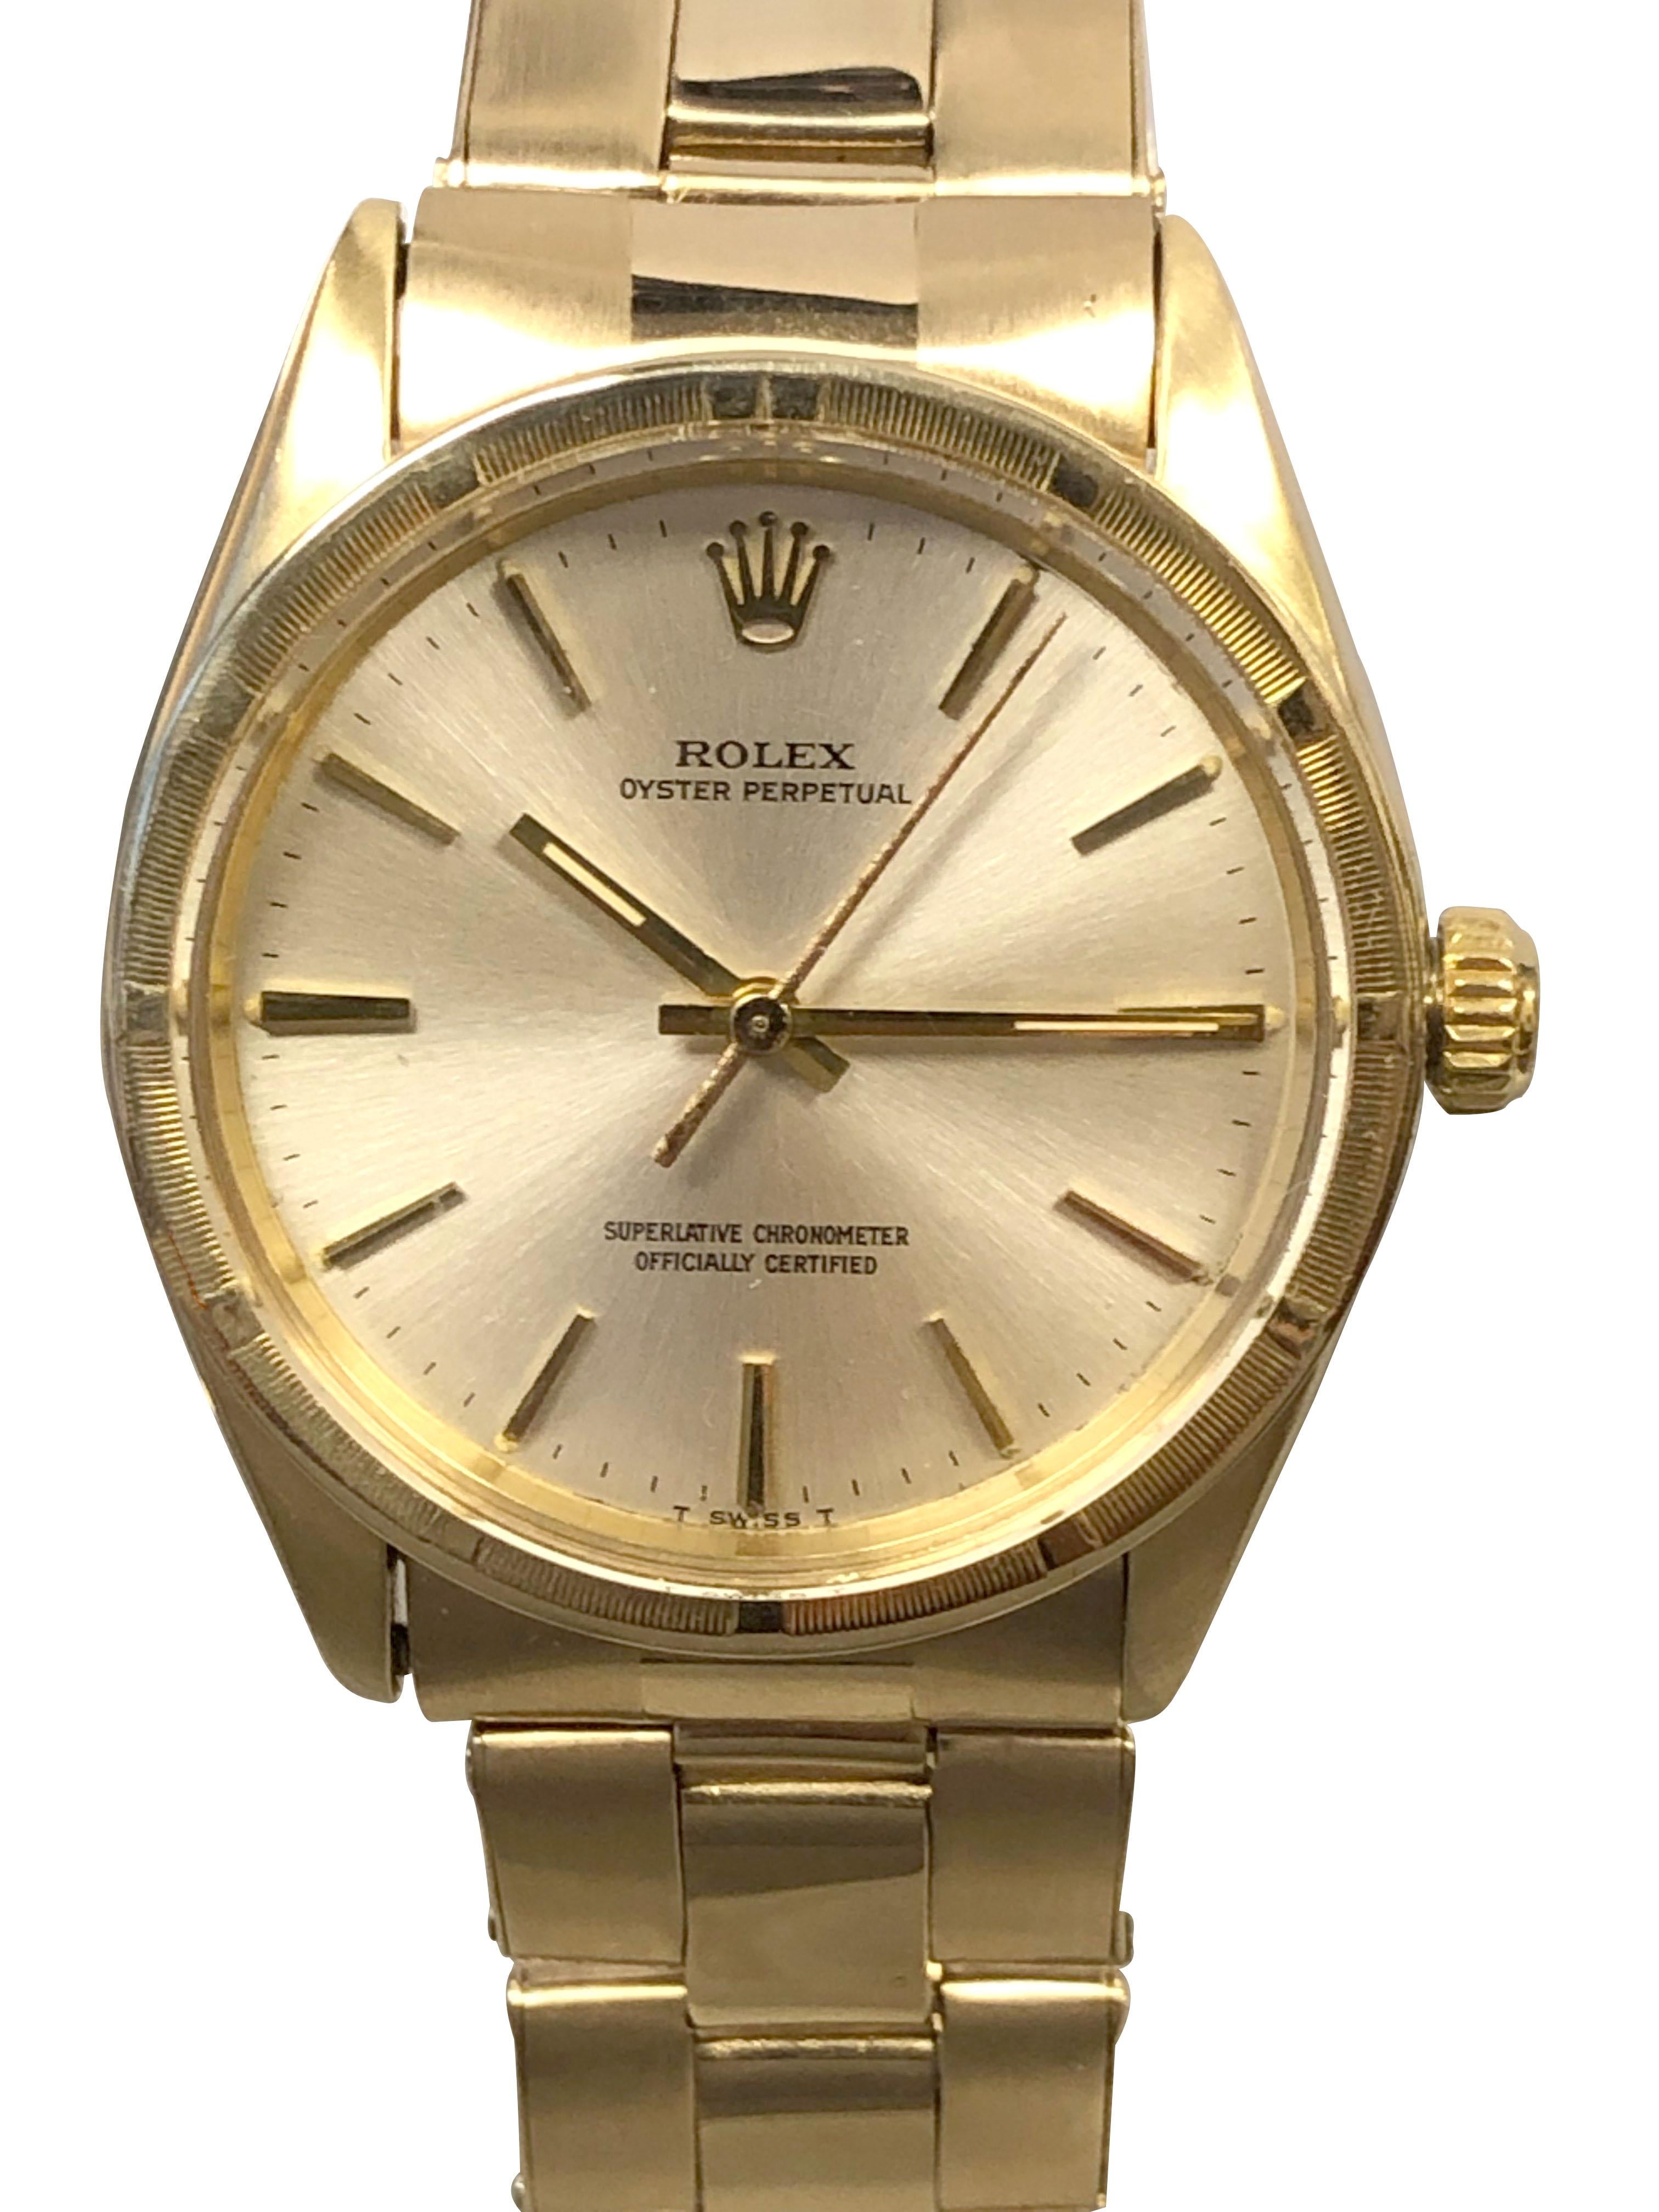 Circa 1970 Rolex Reference 1007 Wrist Watch, 34 M.M. 14k Yellow Gold 3 Piece Oyster case. Engine turned bezel, original and mint condition Silver Satin  dial with raised Gold stick markers and a sweep seconds hand, caliber 1560 Automatic, self